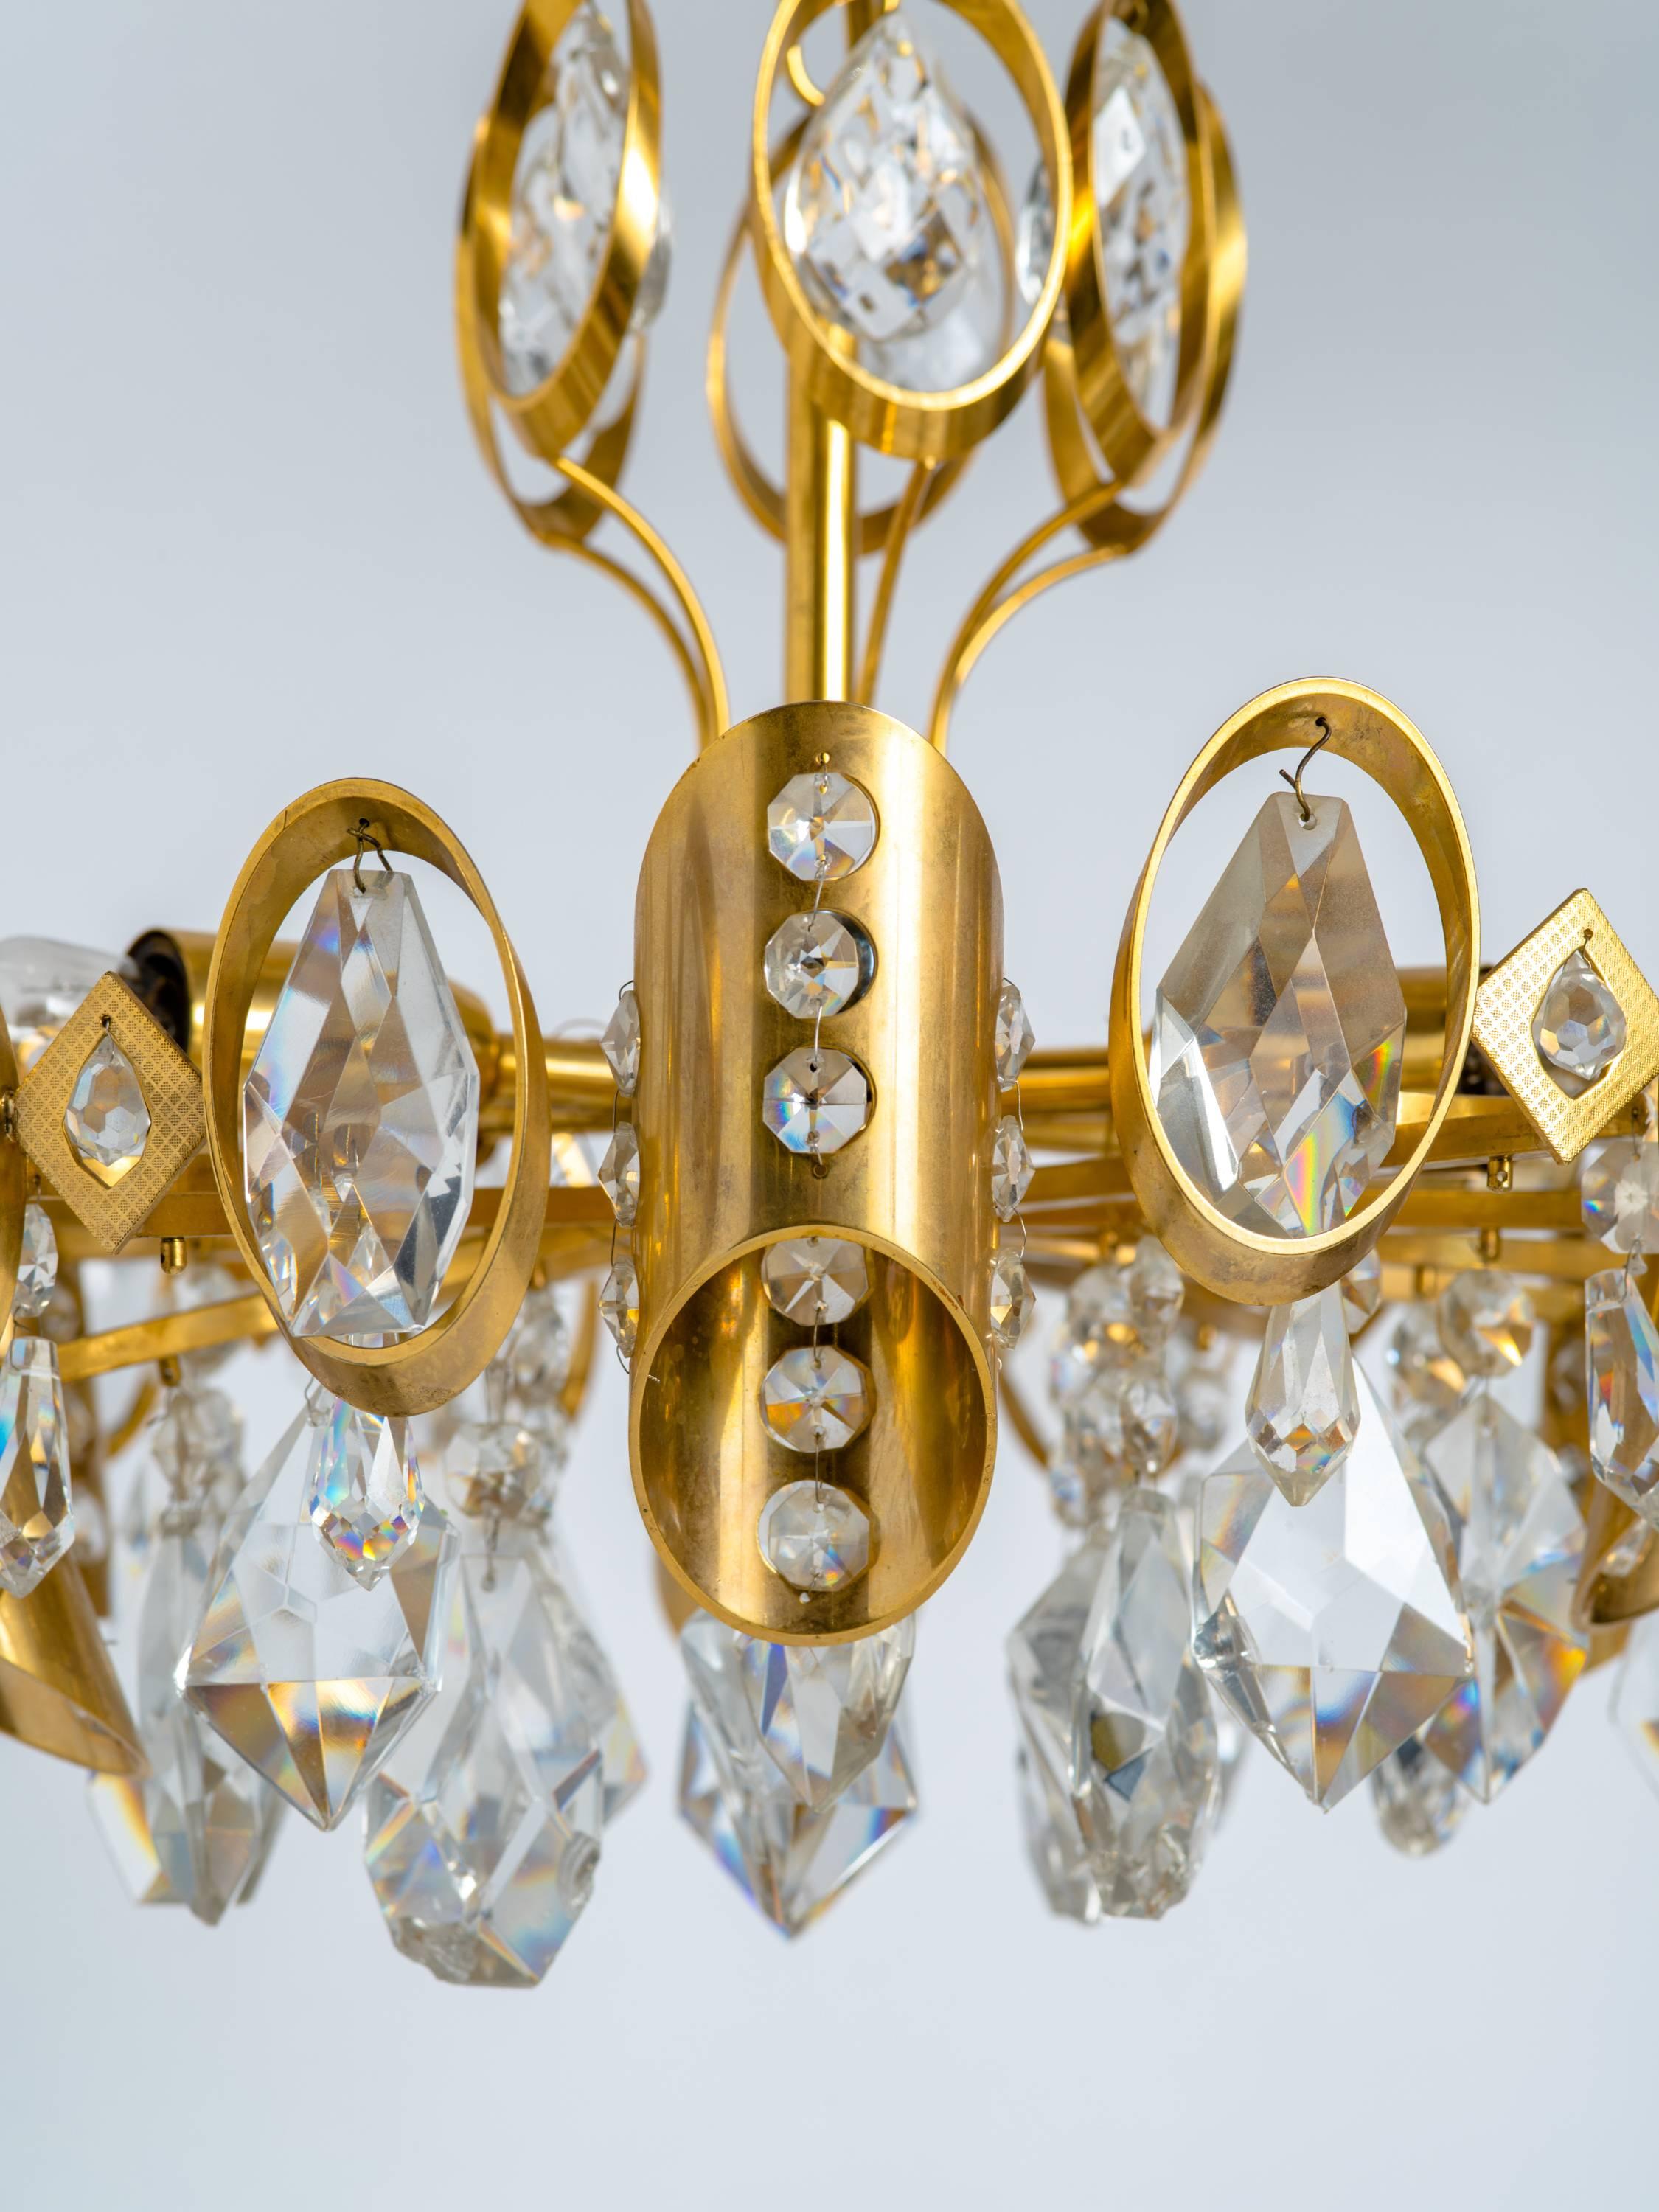 Hollywood Regency small gilded brass chandelier with cut crystal pendants. The geometric design features a series of alternating shapes: ovals, diamonds, and slanted columns, all fitted with crystal prisms or beaded crystal accents. The petite